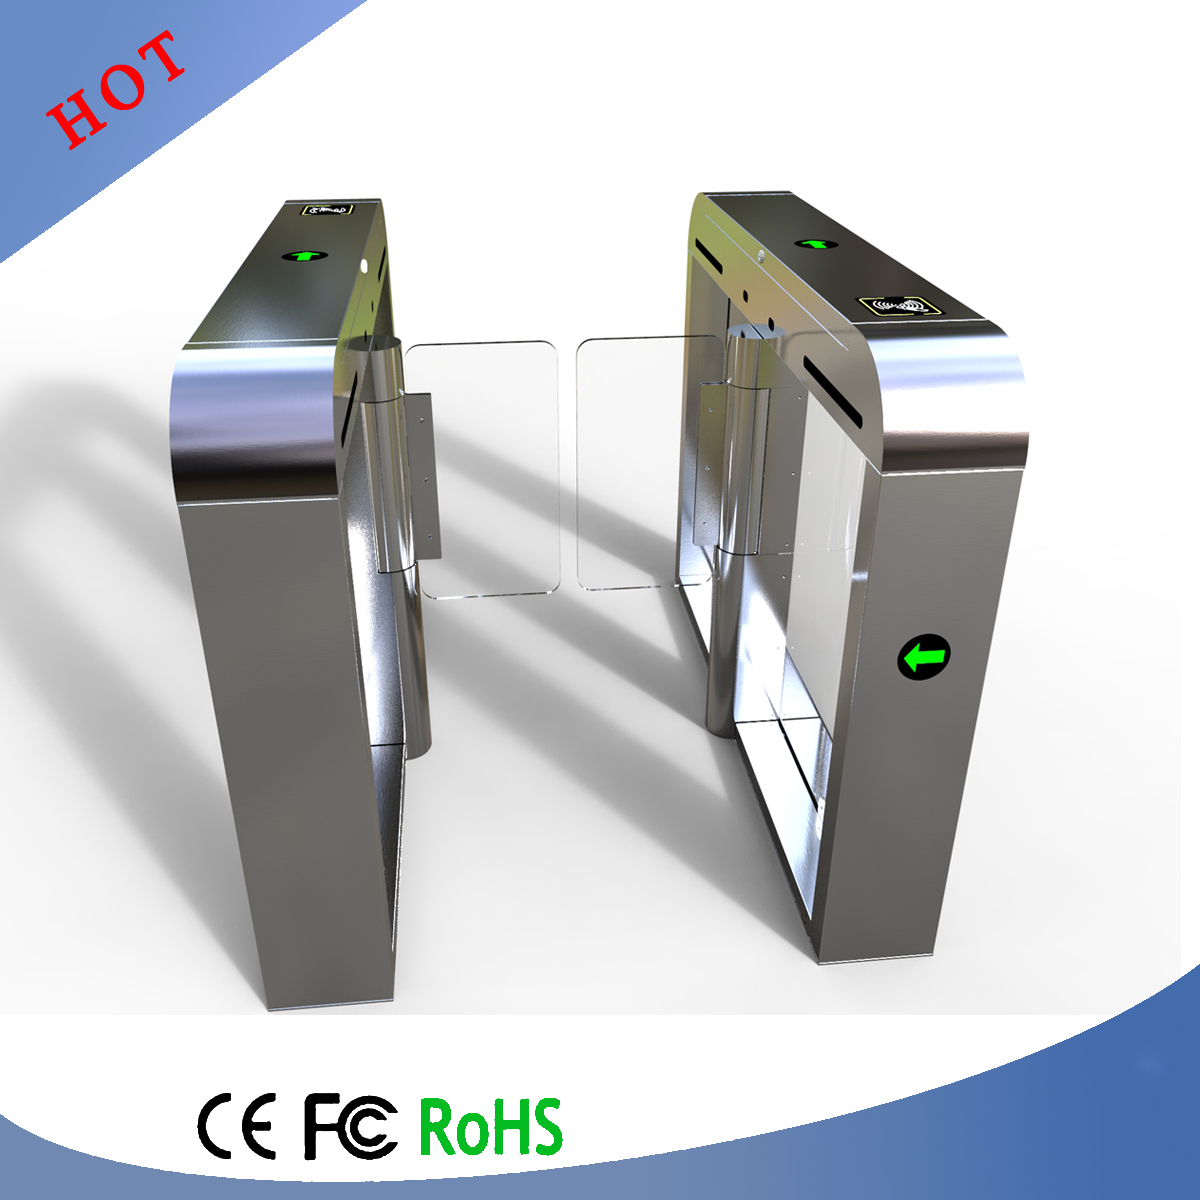 Biometric Tripod Turnstile Supplier from China, Automatic Speed Gate Barrier